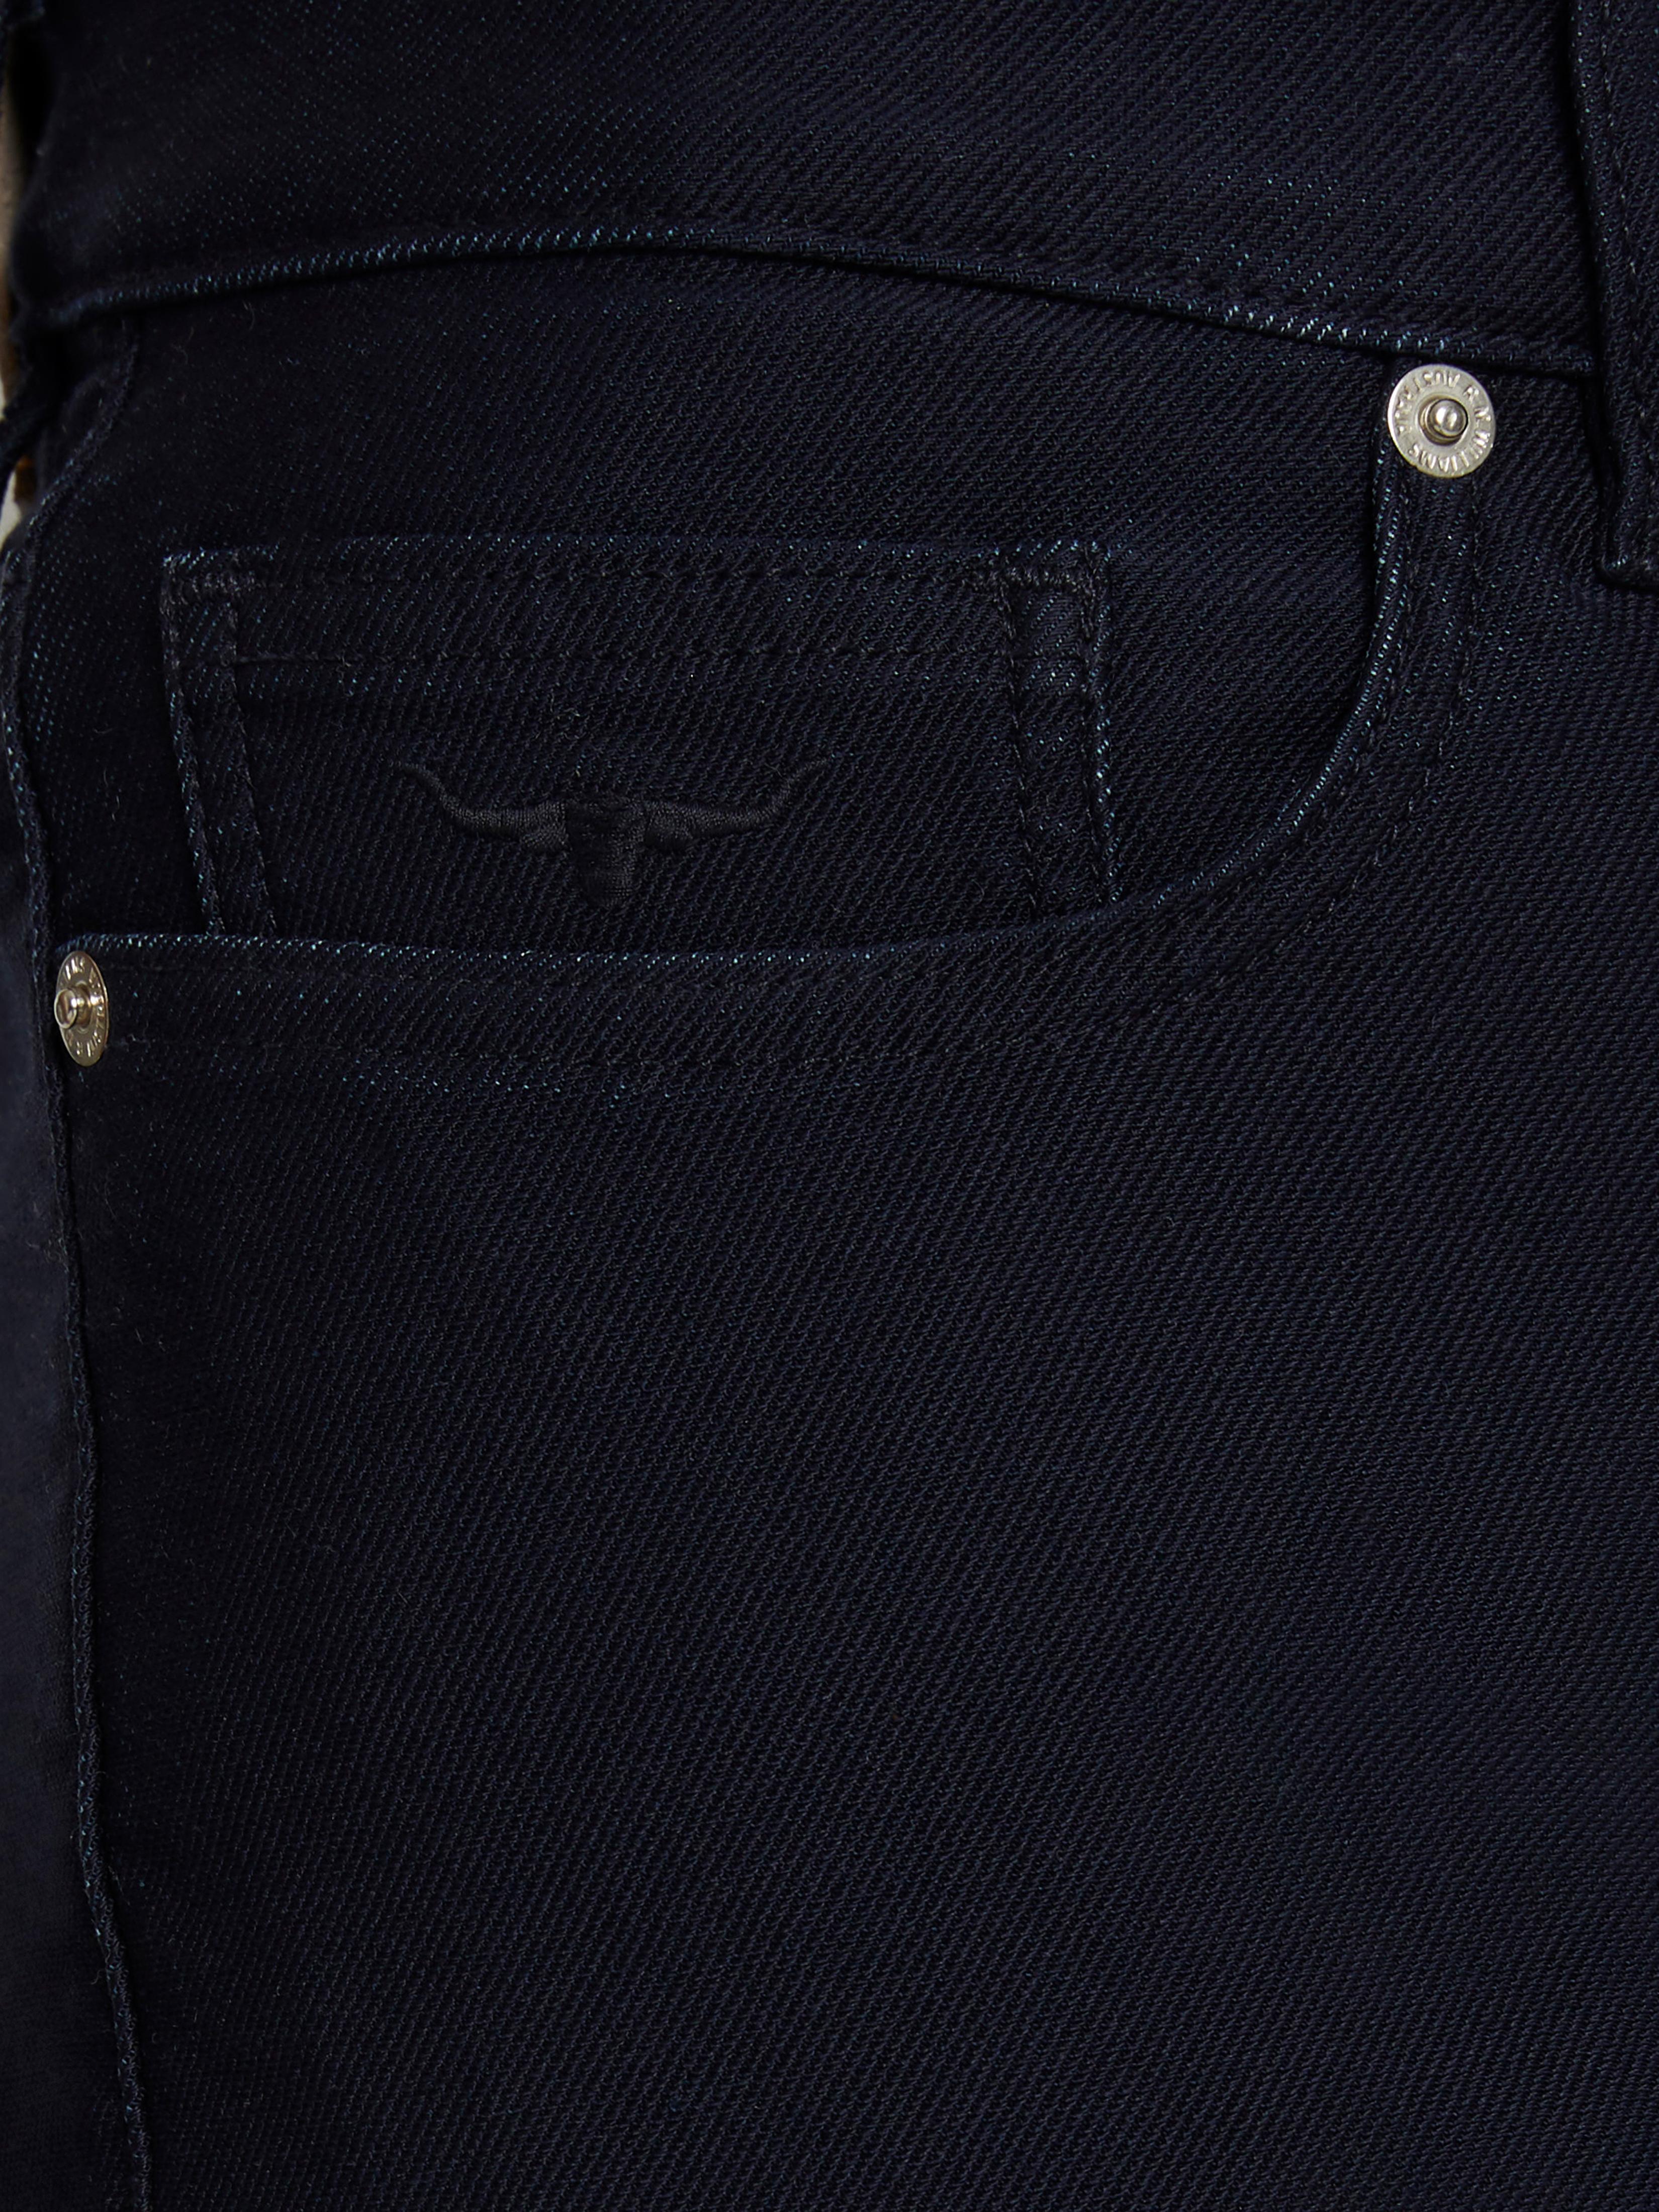 Buy > rm williams loxton jeans > in stock